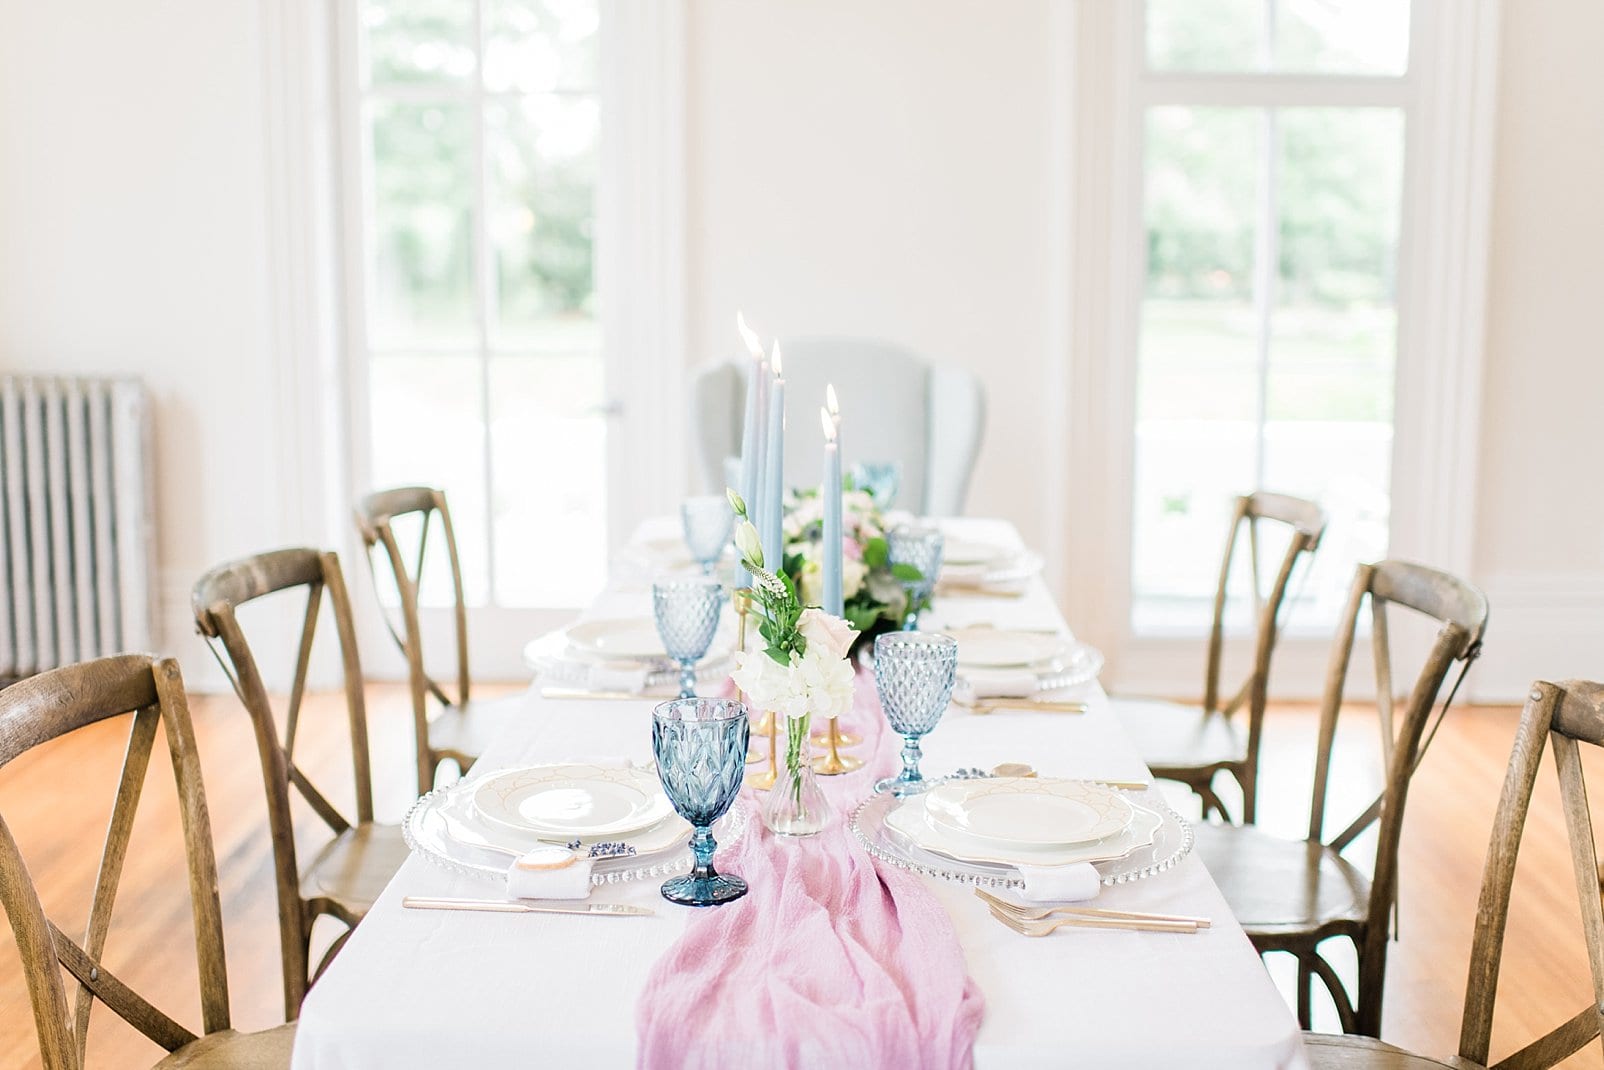 Greenhouse picker sisters specialty rentals table place setting with pink table runner and light blue accents photo